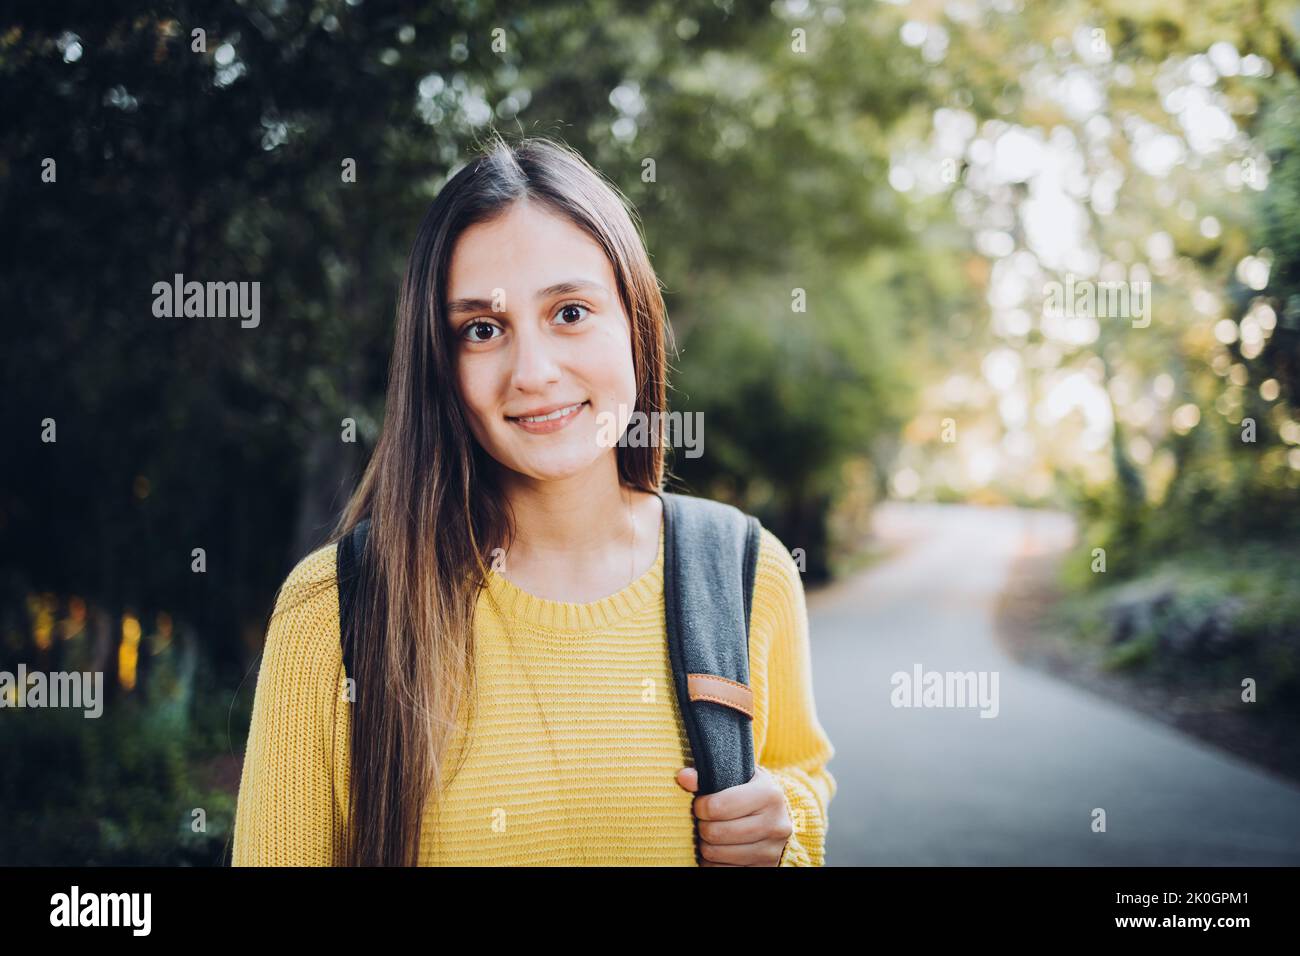 Smiling university student woman wearing a yellow sweater and carrying a backpack in the campus park Stock Photo